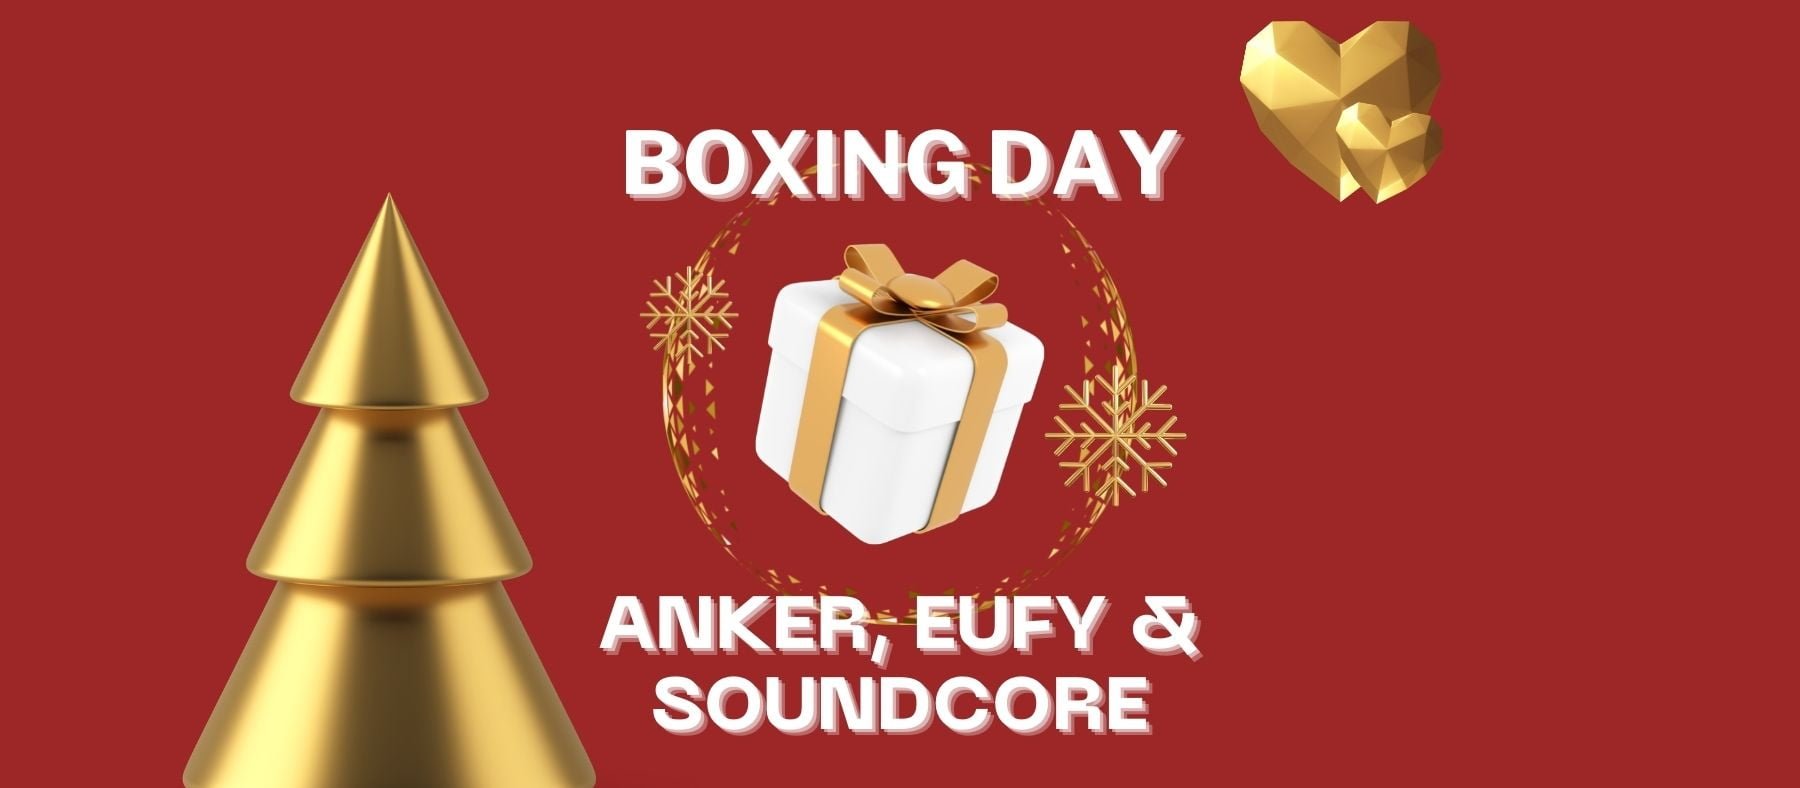 Anker, Eufy & Soundcore Boxing Day Deals